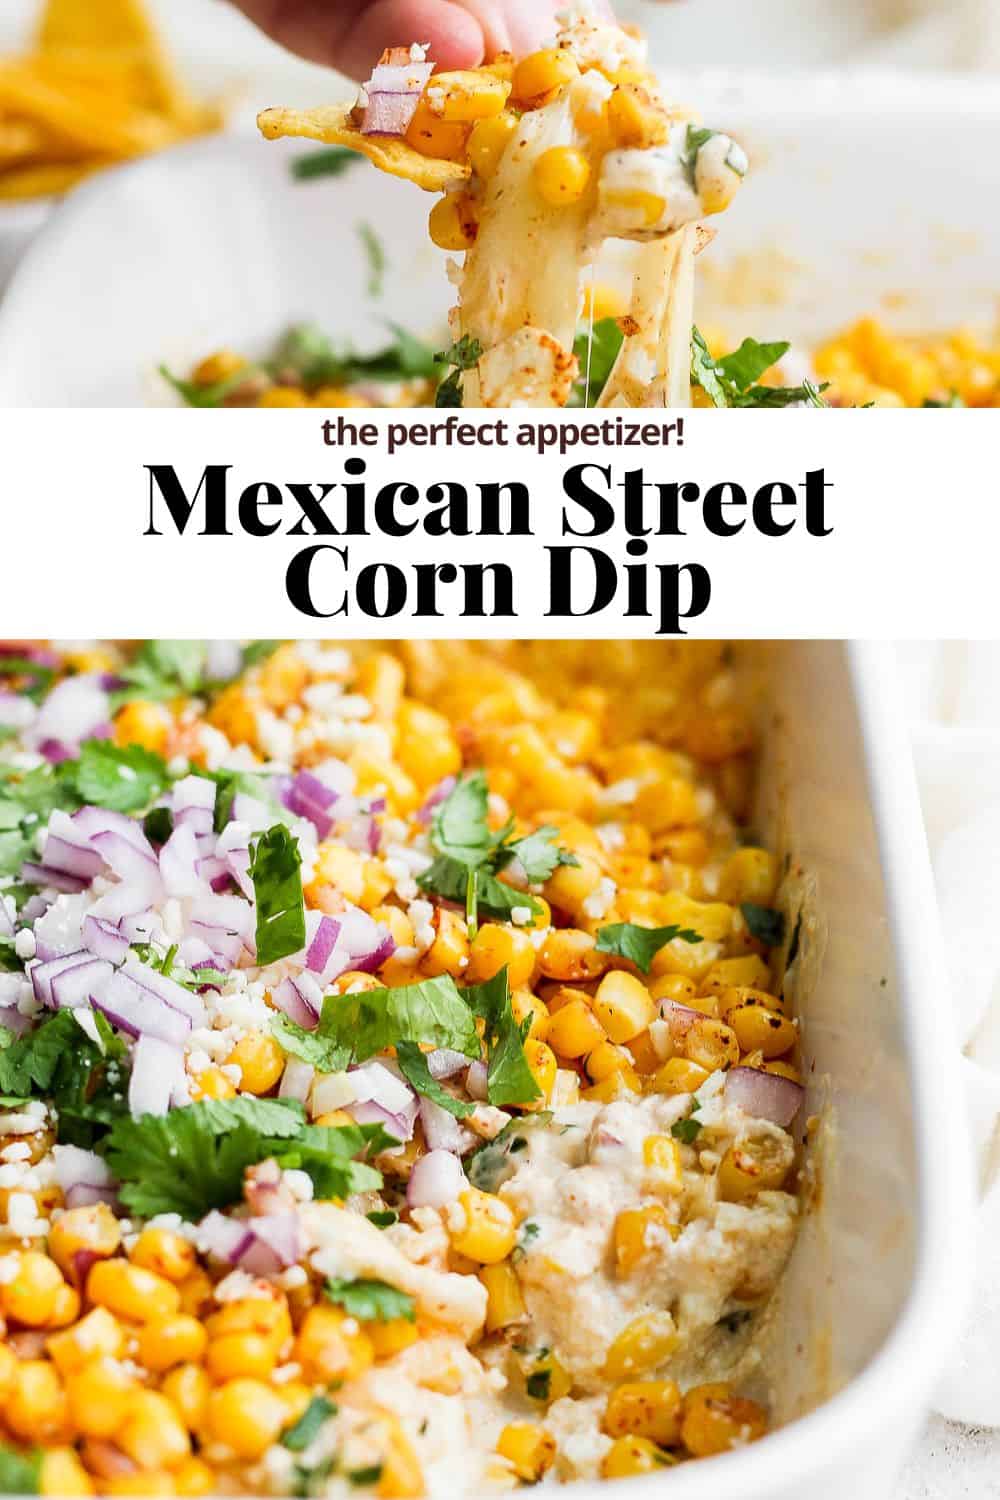 Pinterest image showing the hand pulling a scoop of the dip away from the dish, the recipe title. and then the completed dip in the baking dish.